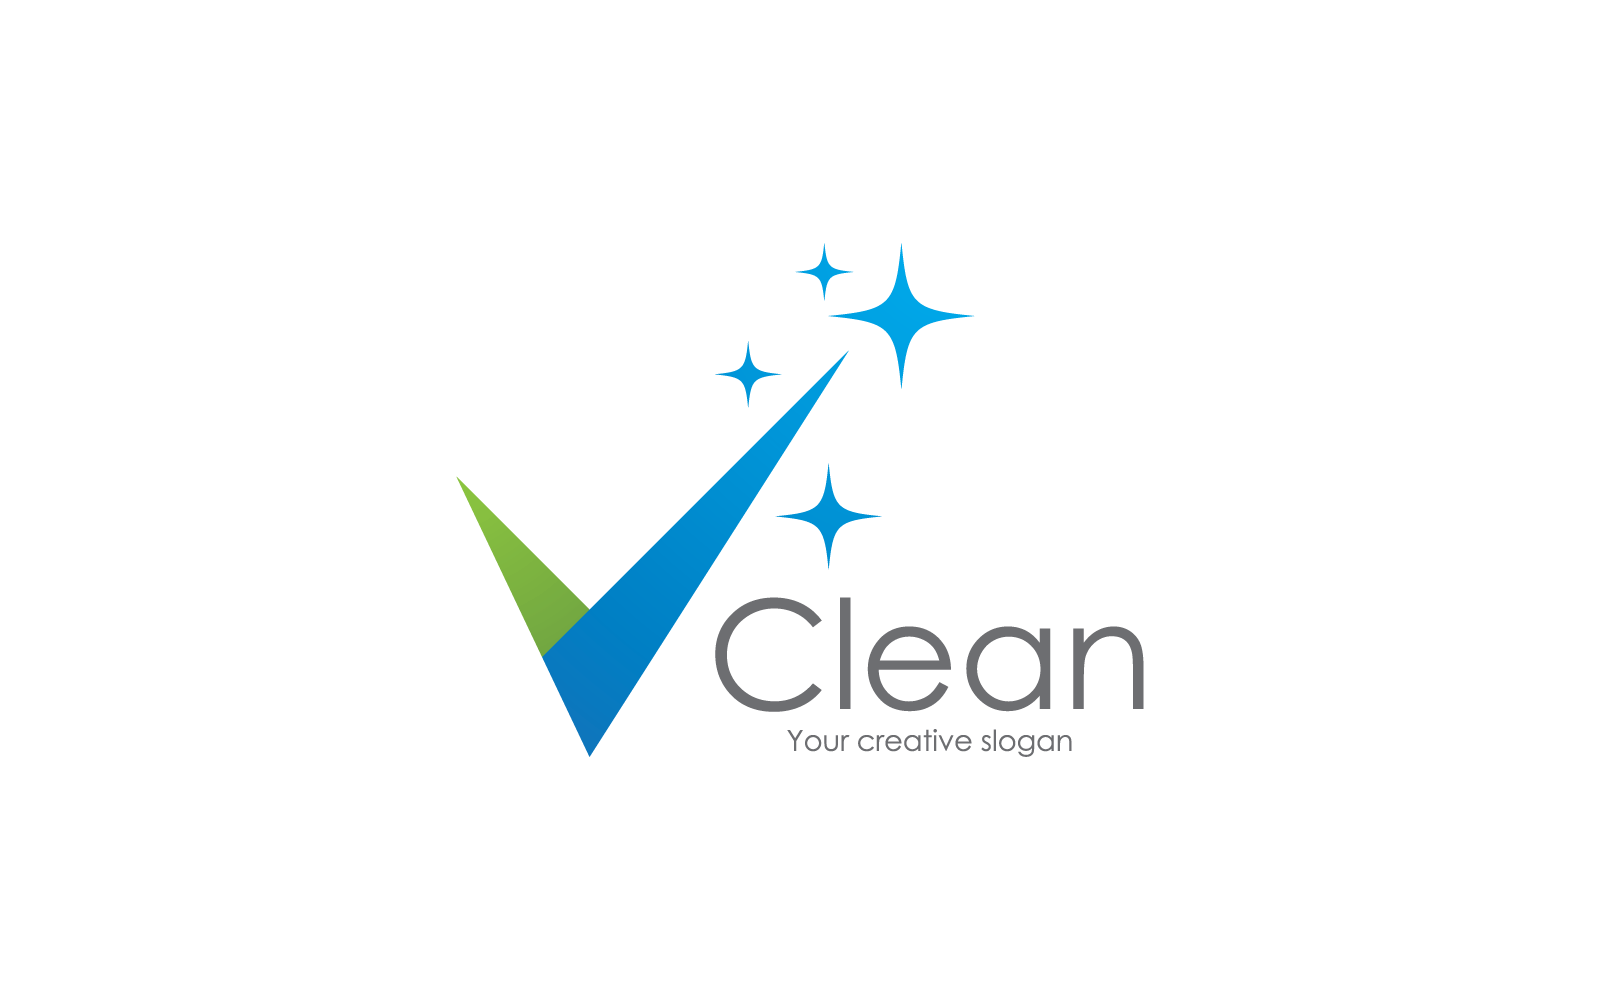 Cleaning logo and symbol illustration vector design template Logo Template